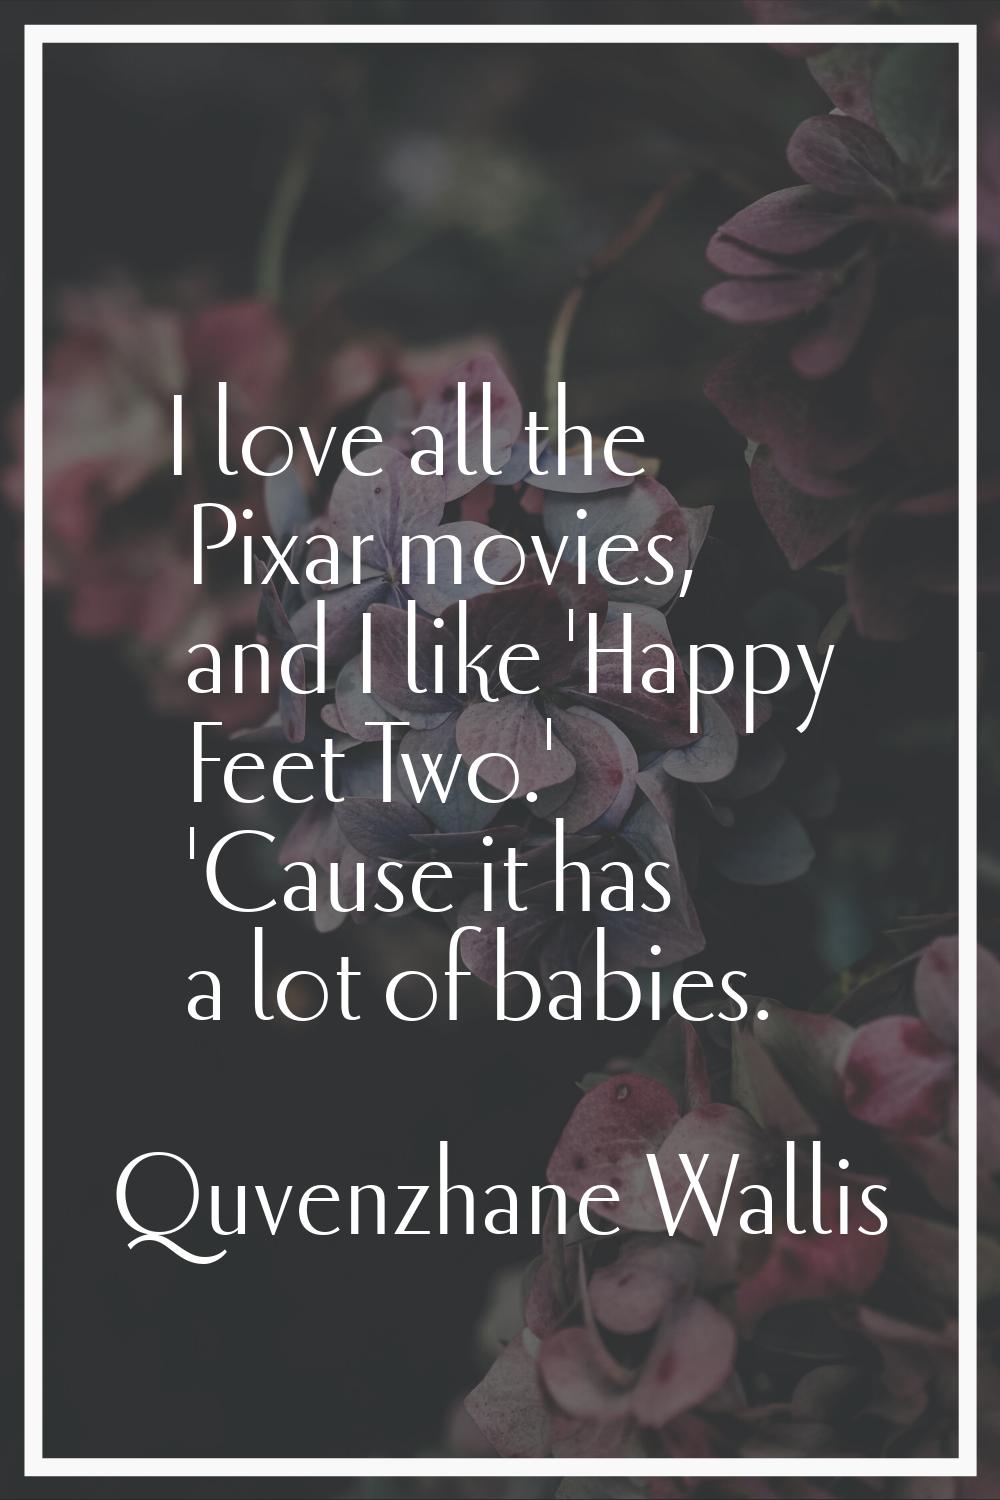 I love all the Pixar movies, and I like 'Happy Feet Two.' 'Cause it has a lot of babies.